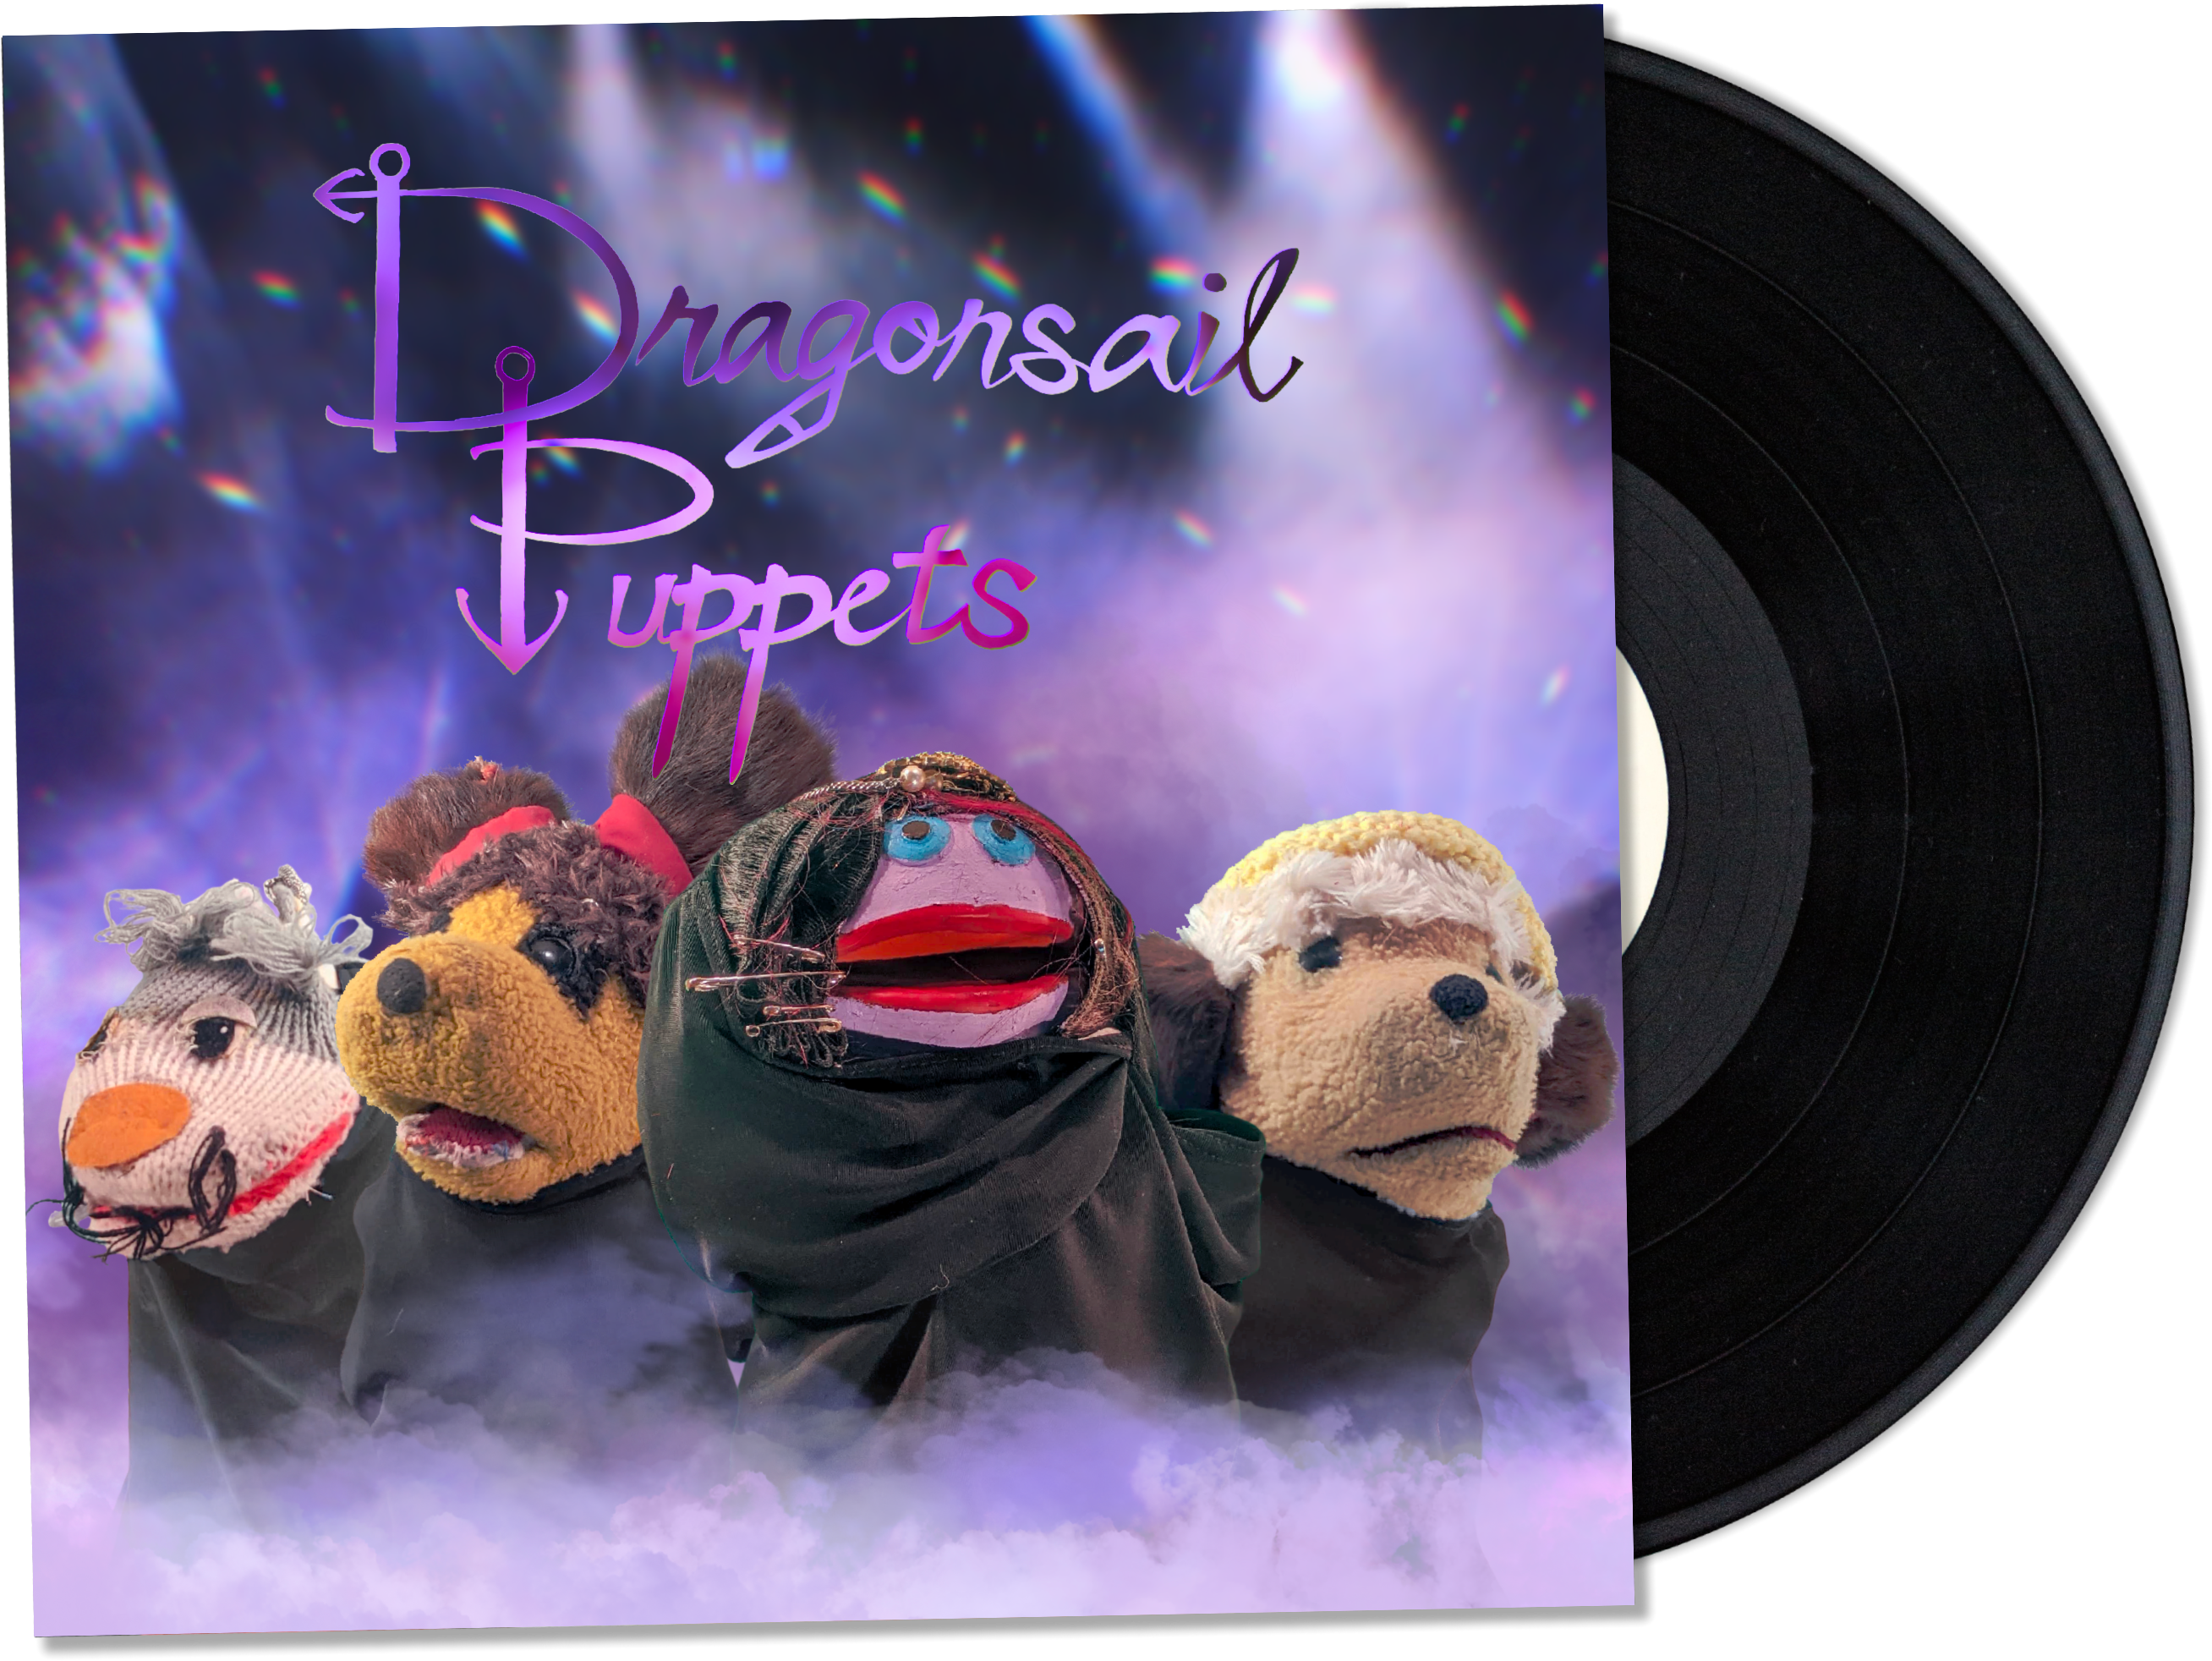 The Dragonsail Puppets' debut album'